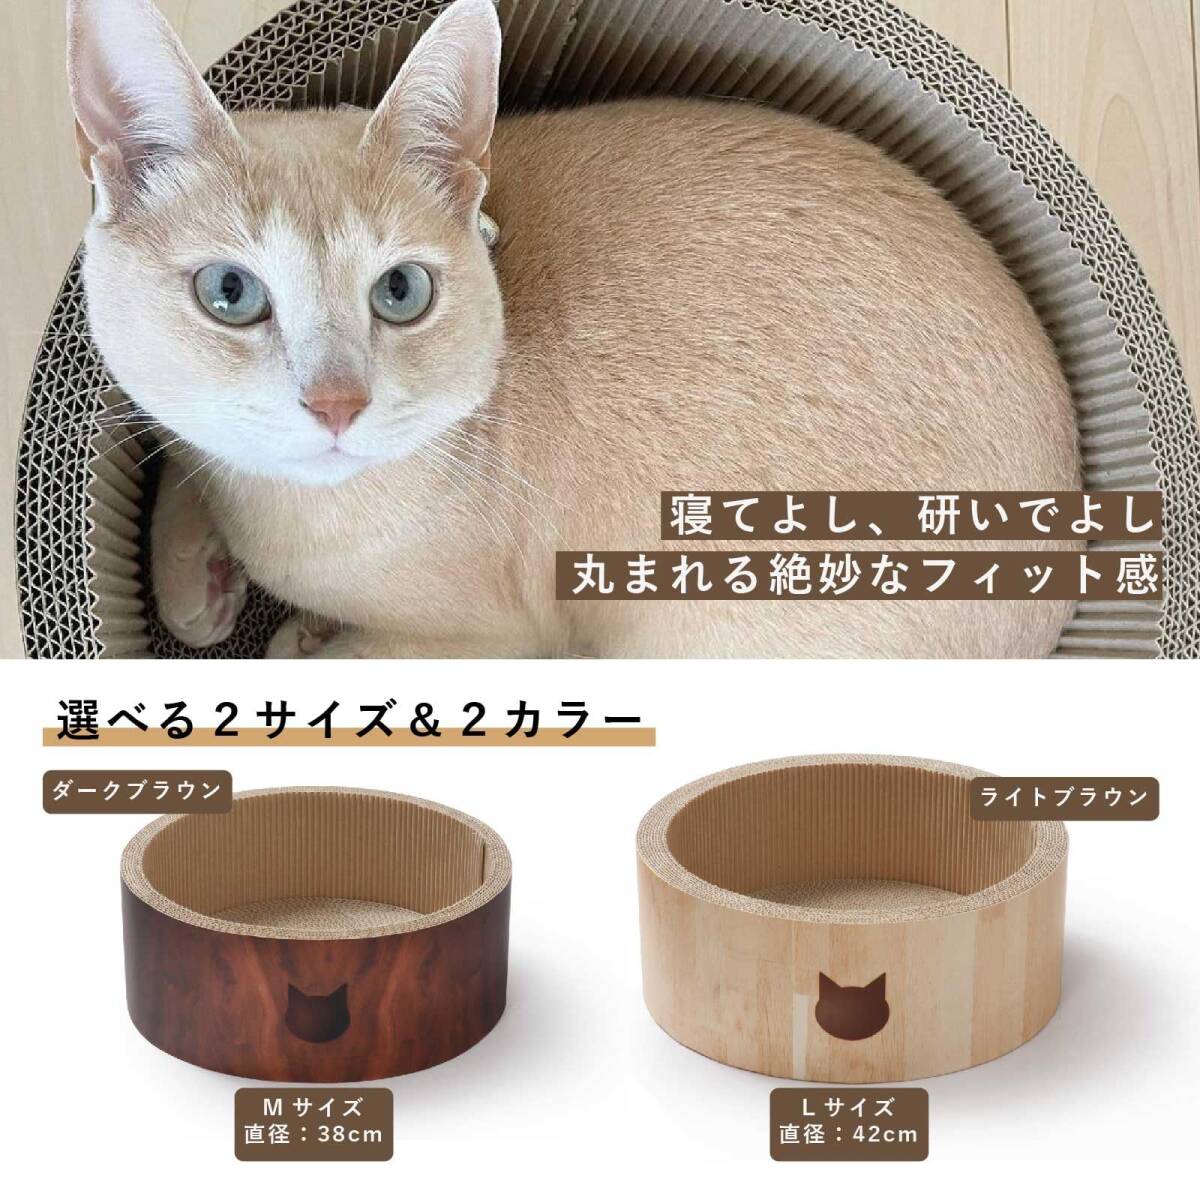 * circle ... round shape bed nail .. love cat natural material bed M size 